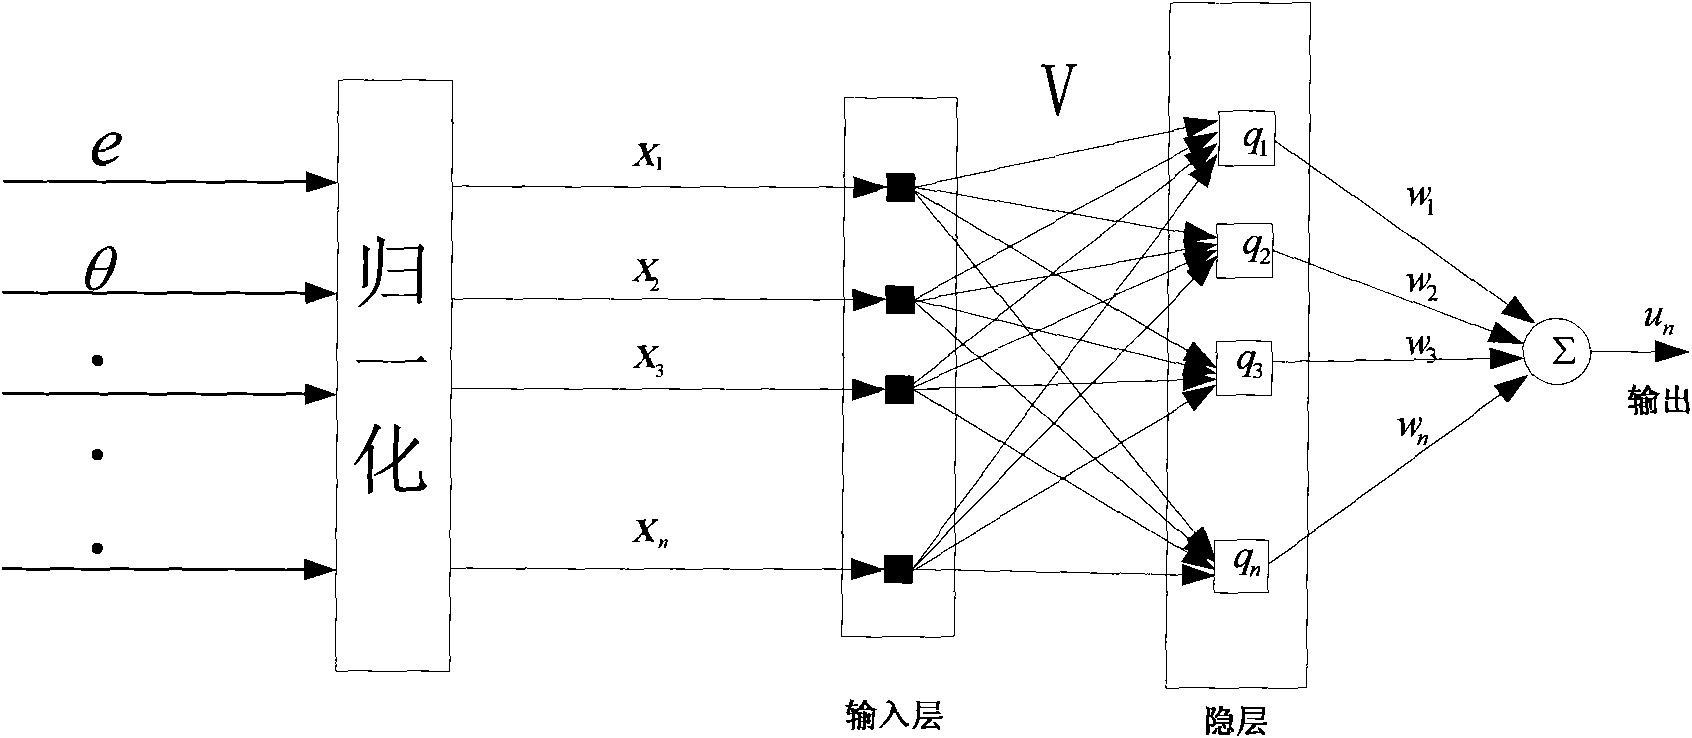 RBF neural network-based servo control system and method